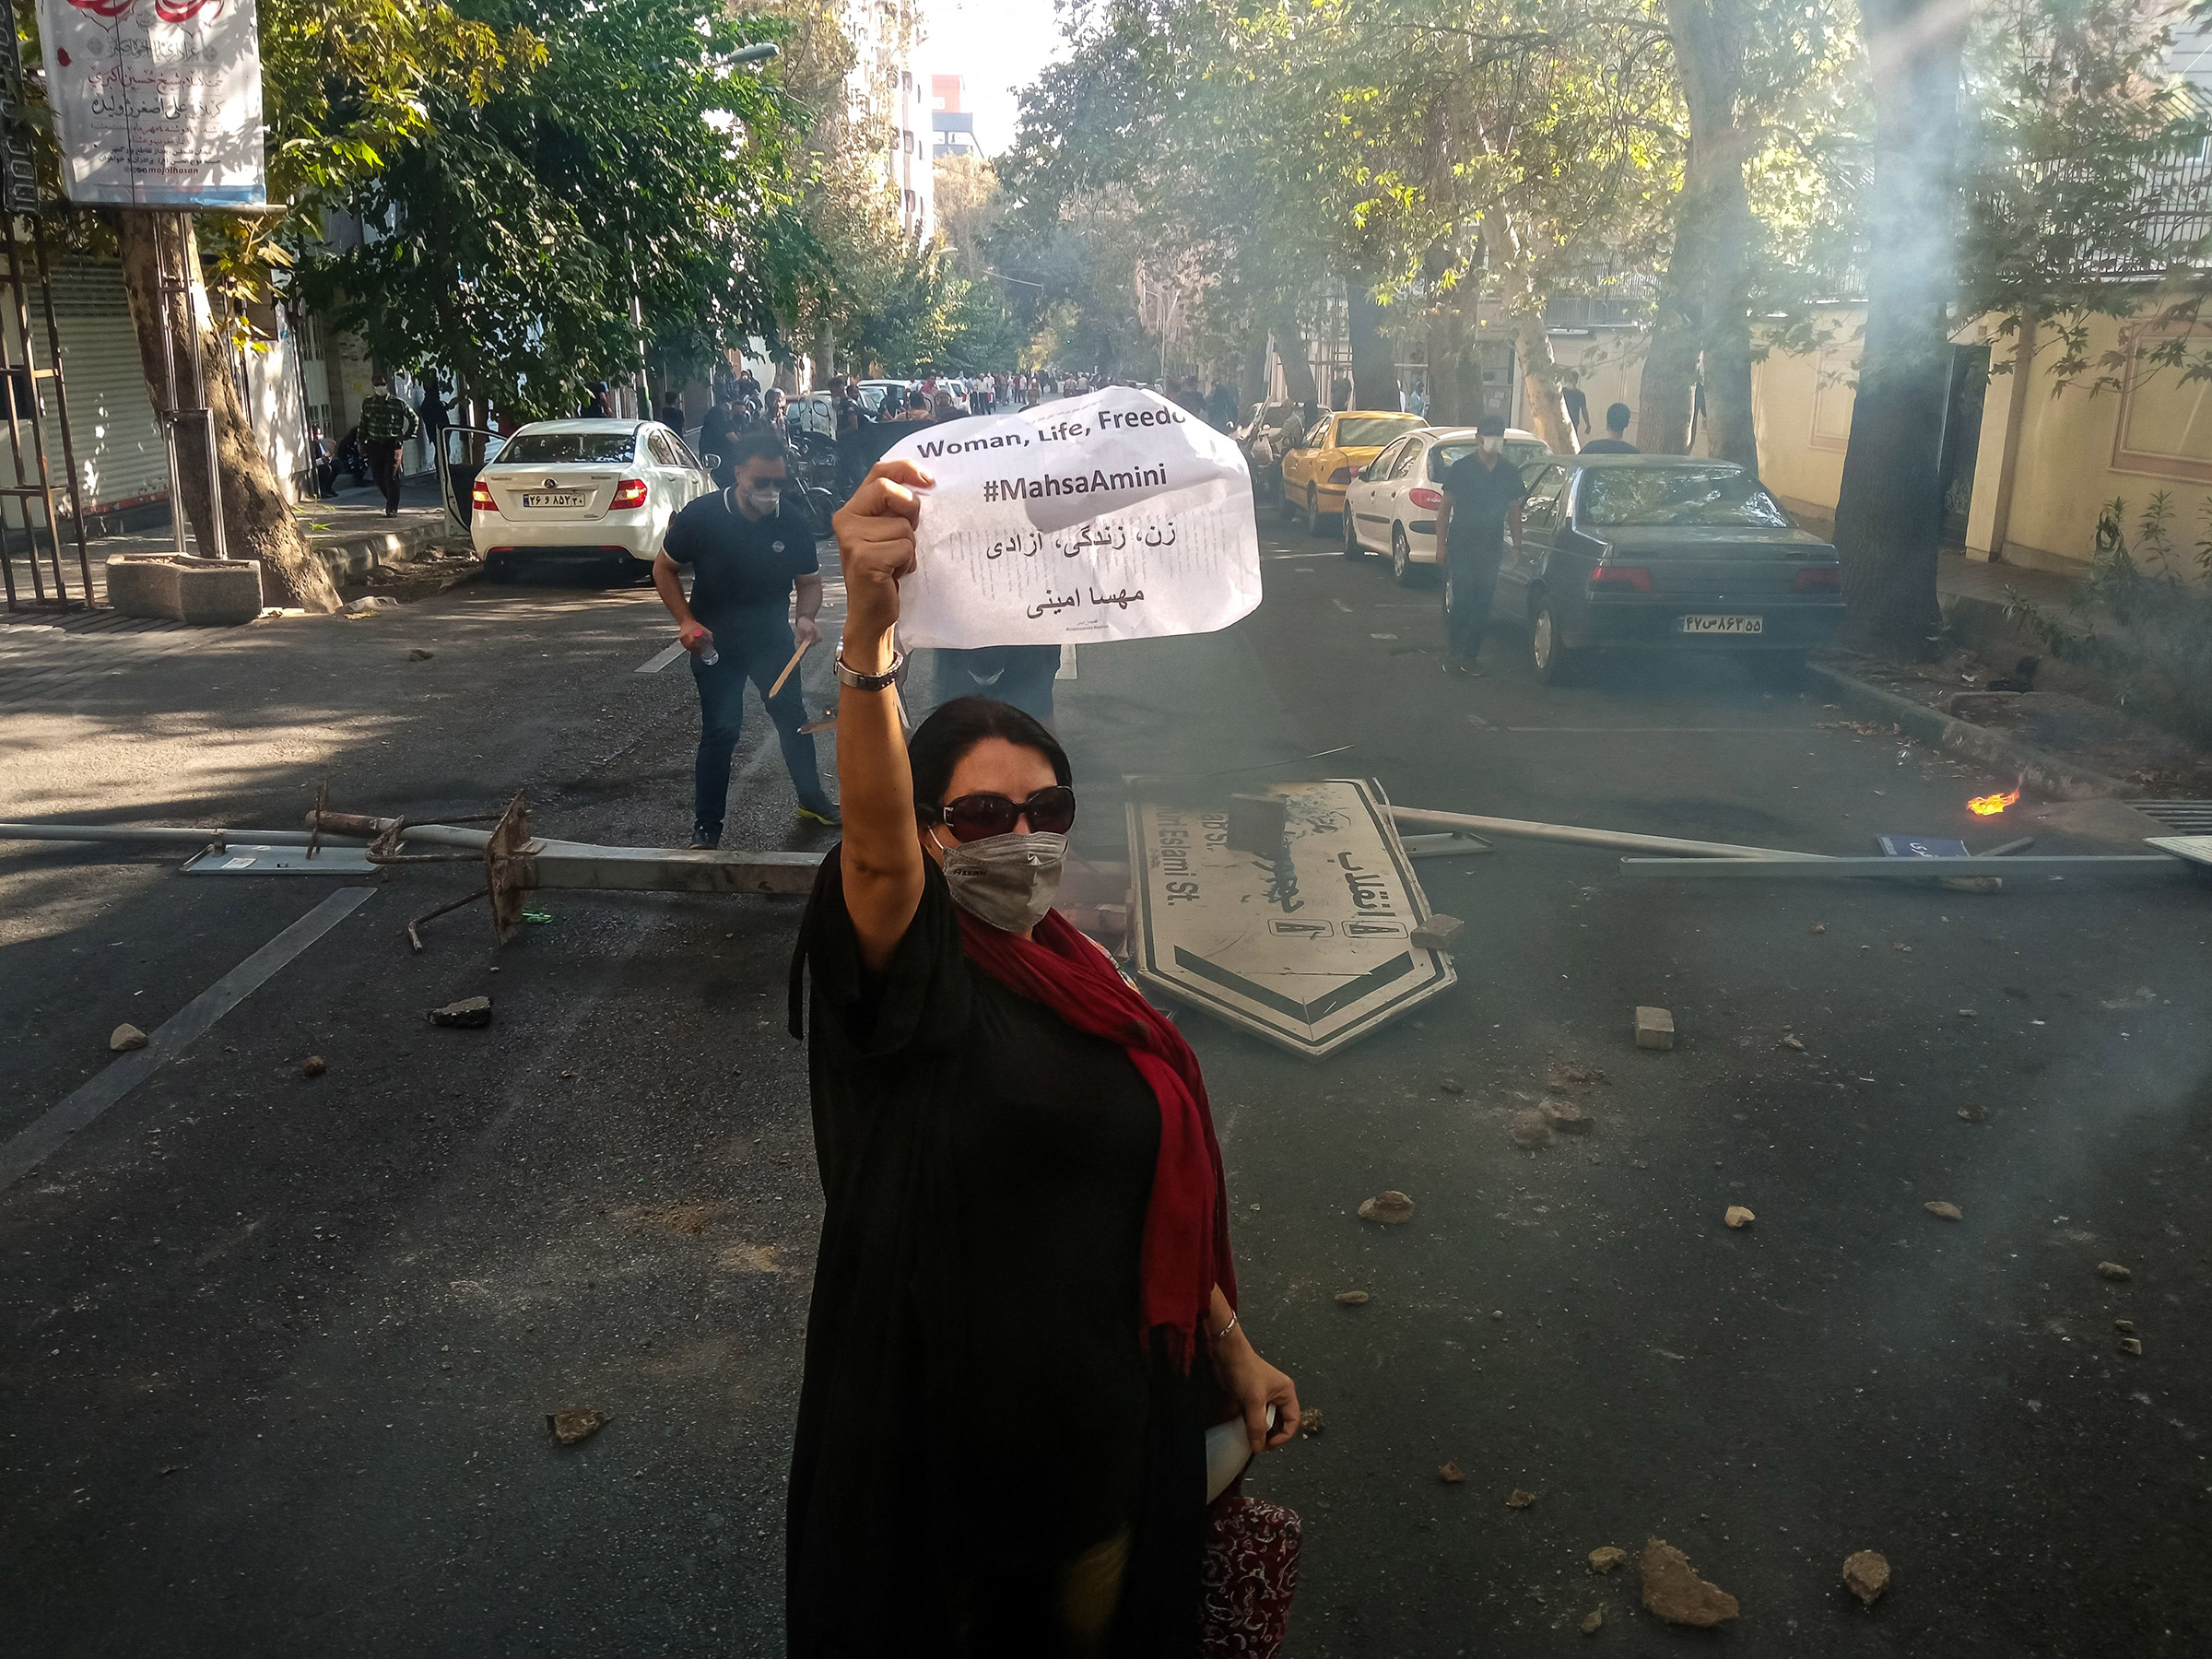 An Iranian woman protester wearing a mask but no hijab holds up a paper reading "Woman, Life, Freedom" and "Mahsa Amini" in front of a street sign on the ground with Revolution and Islamic Republic names on it near Enghelab (Revolution) Street in Tehran, on Oct. 1, 2022.